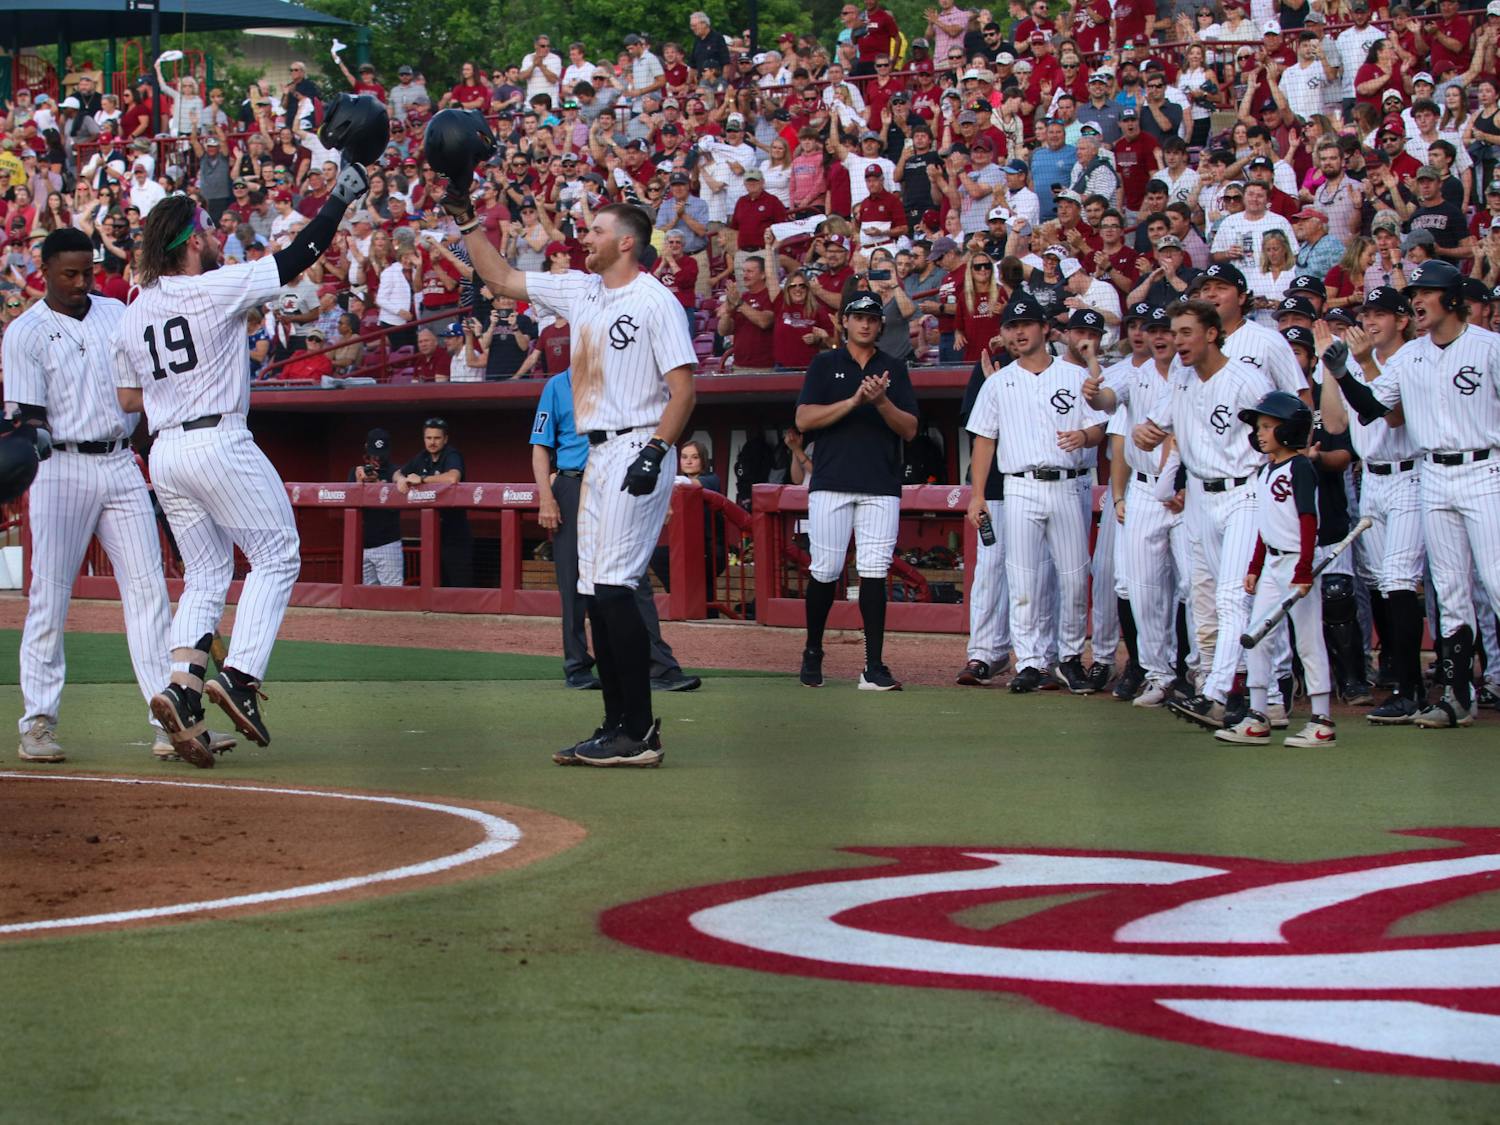 Sophomore catcher Cole Messina celebrates hitting a two-run home run in the first inning against the Gators on April 21, 2023. South Carolina won 5-2, securing the series victory over Florida.